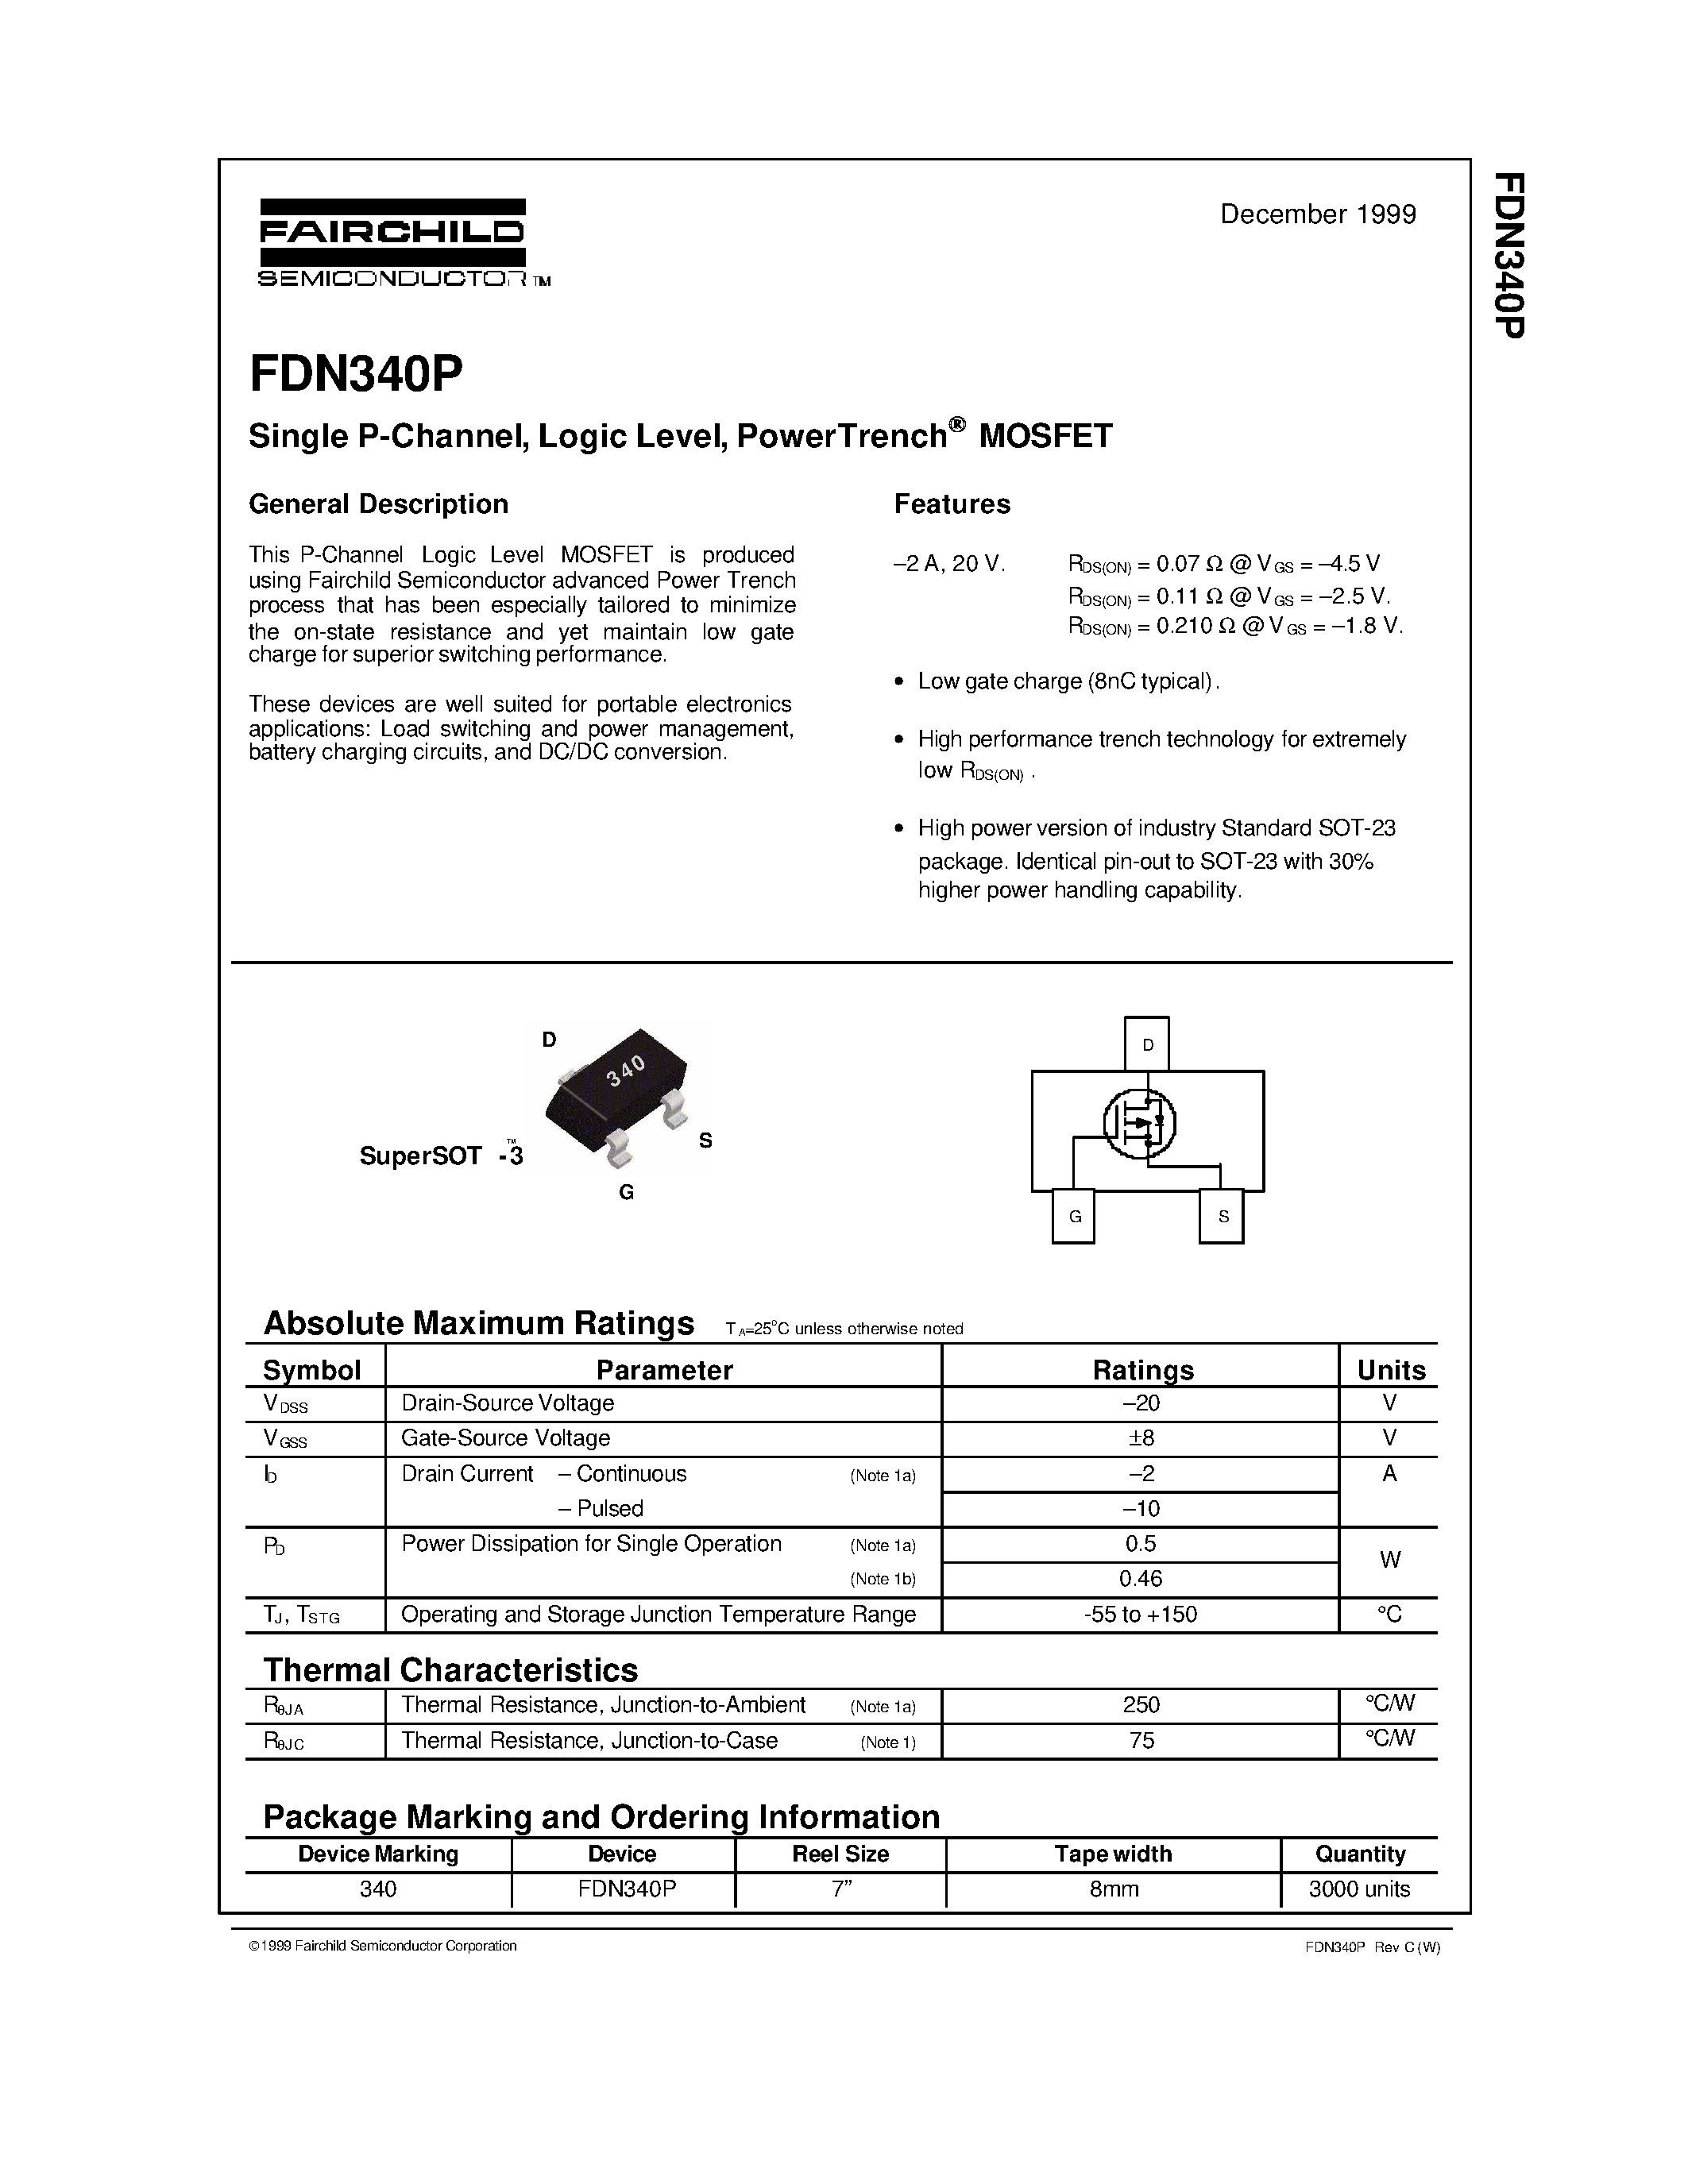 Даташит FDN340-Single P-Channel/ Logic Level/ PowerTrench MOSFET страница 1